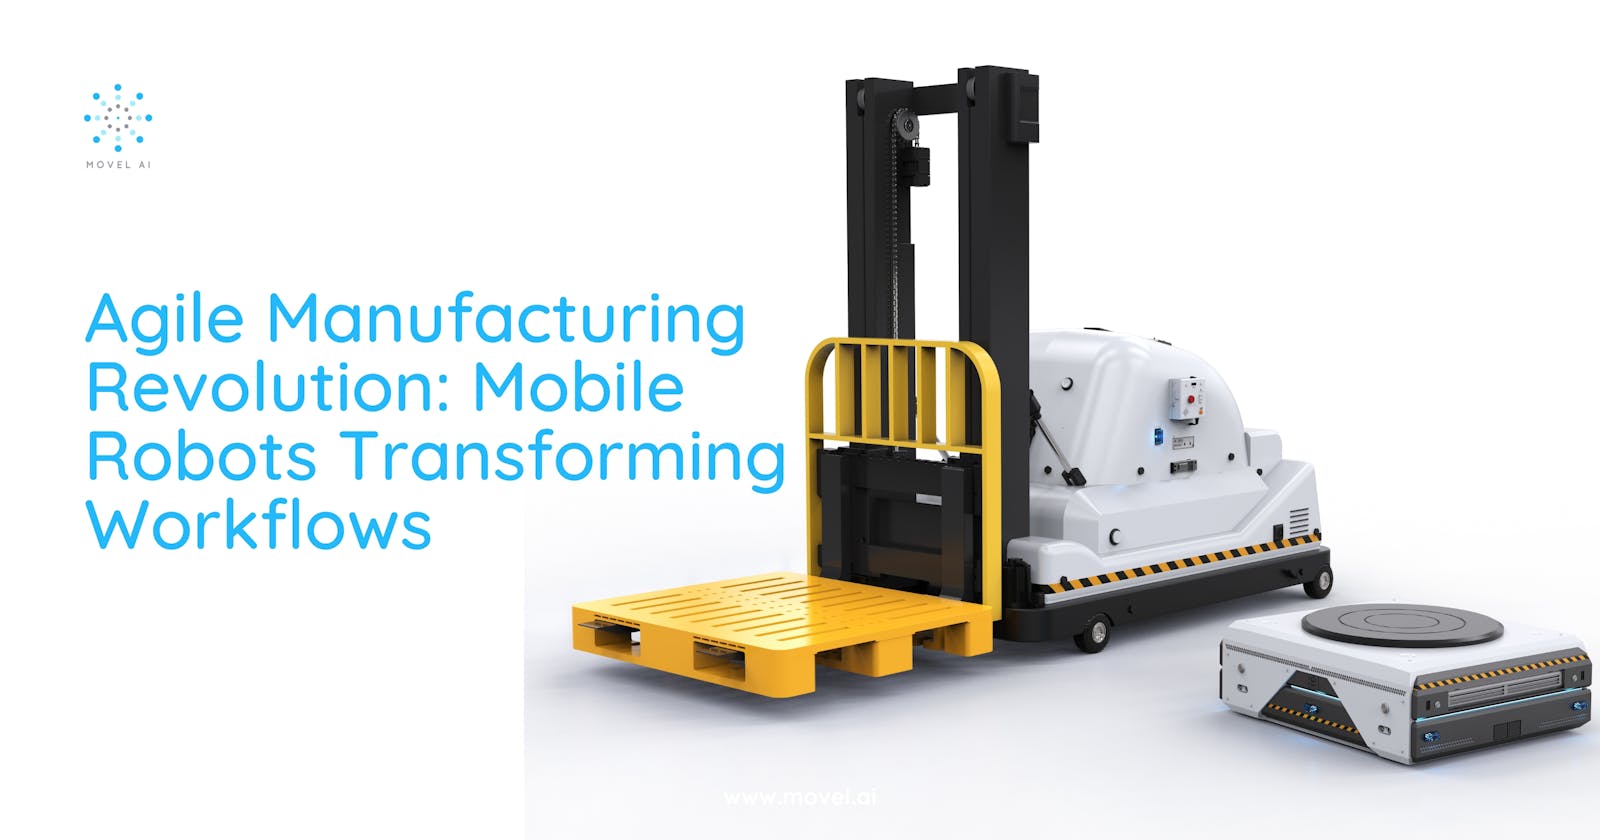 Agile Manufacturing Revolution: Mobile Robots Transforming Workflows